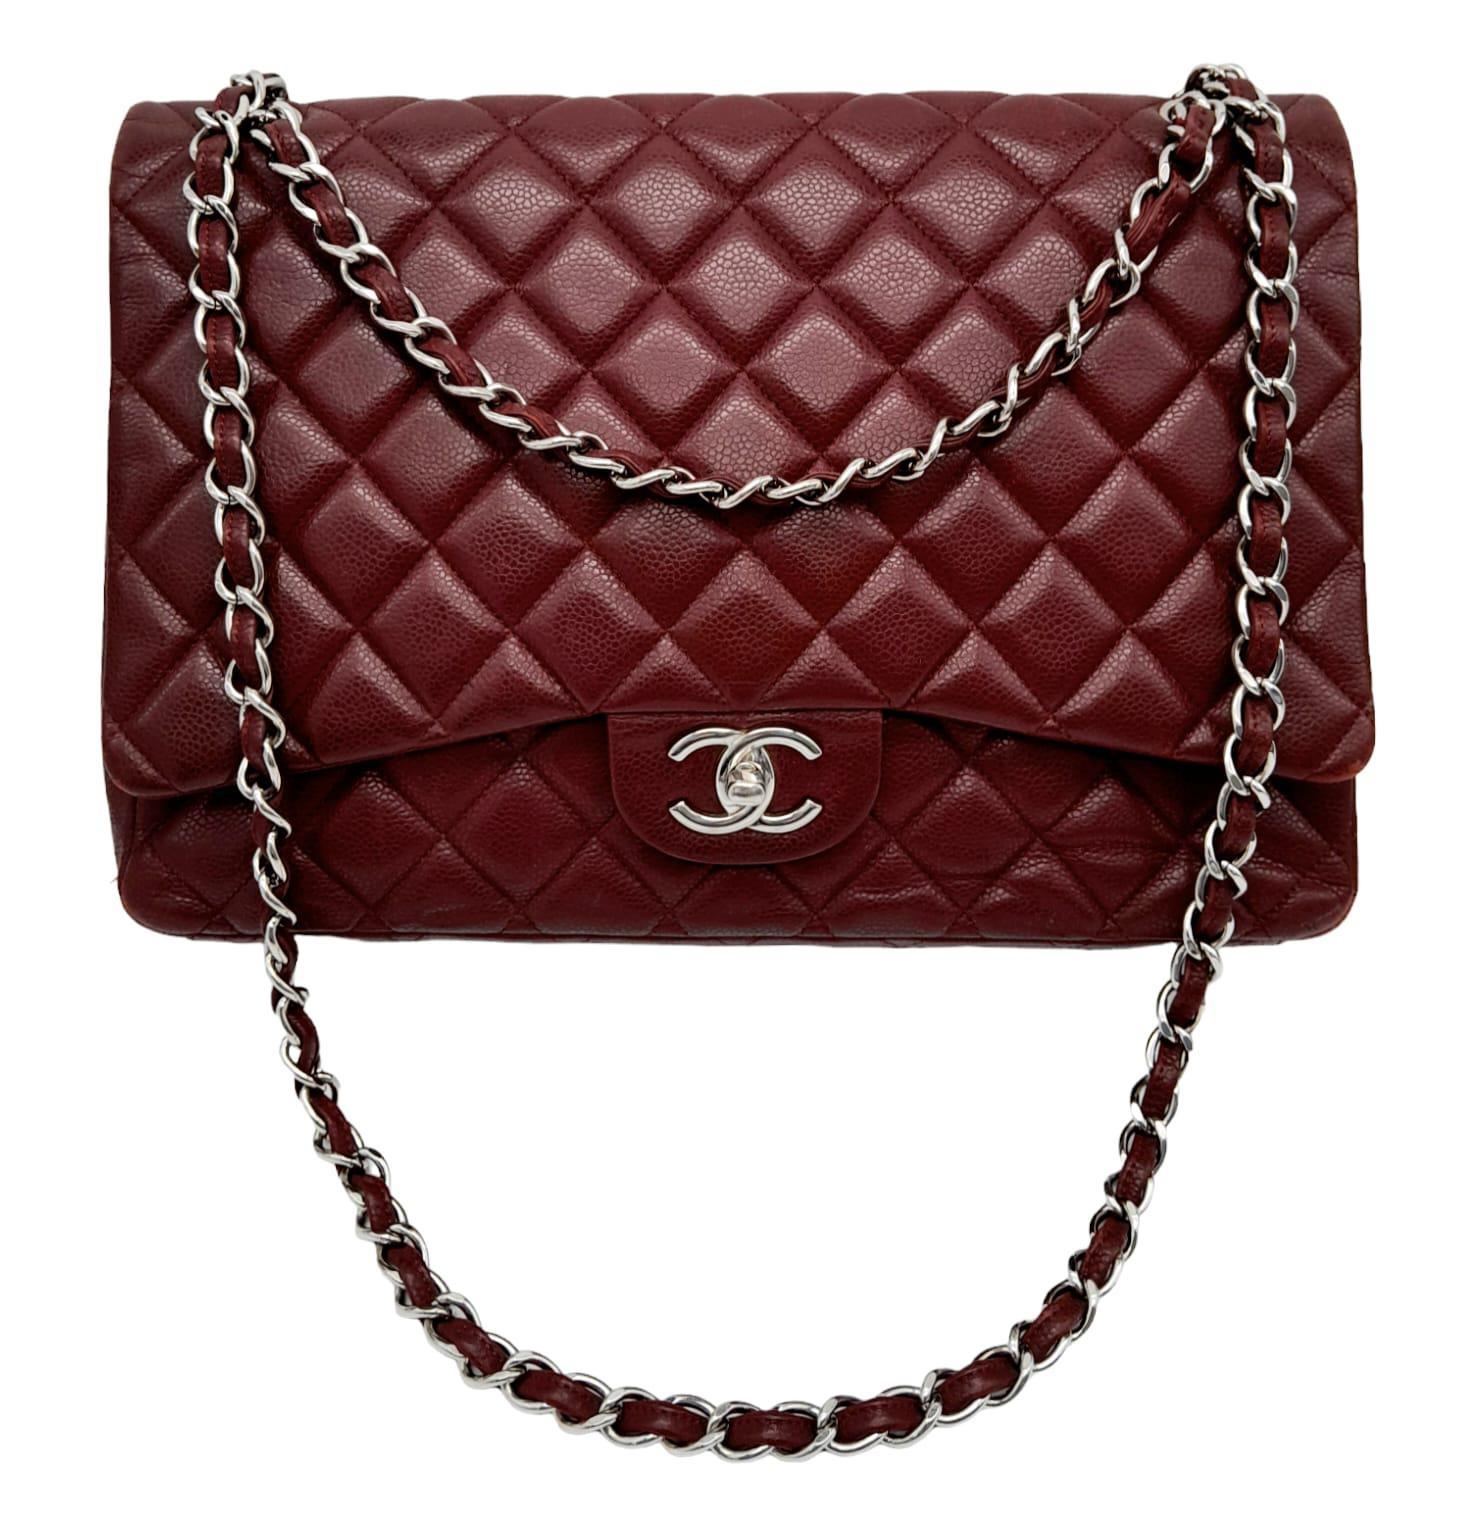 A Chanel Burgundy Jumbo Classic Double Flap Bag. Quilted leather exterior with silver-toned